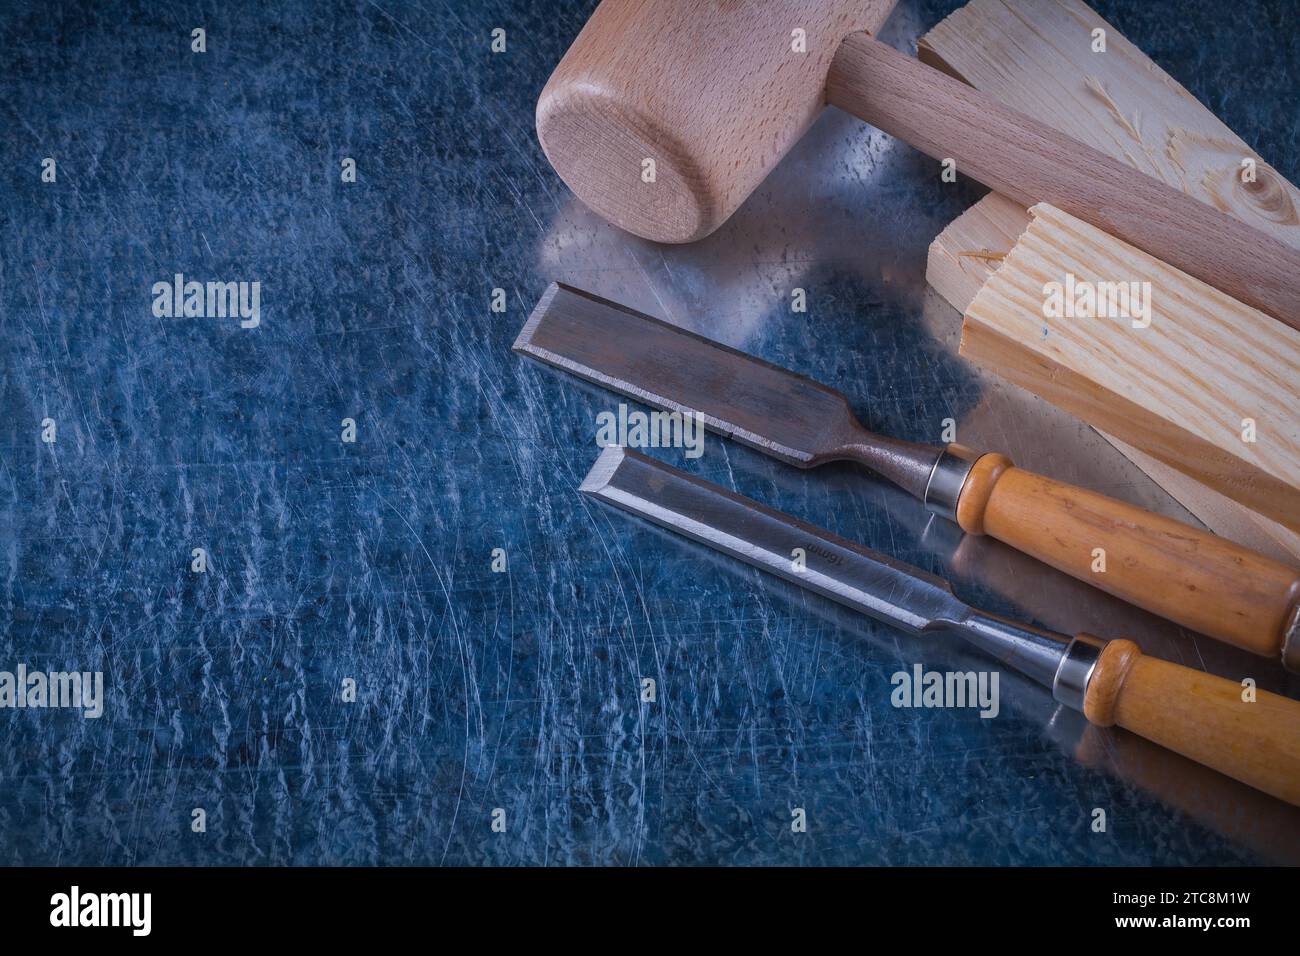 Lump hammer wooden studs and flat chisels on scratched metallic background construction concept Stock Photo